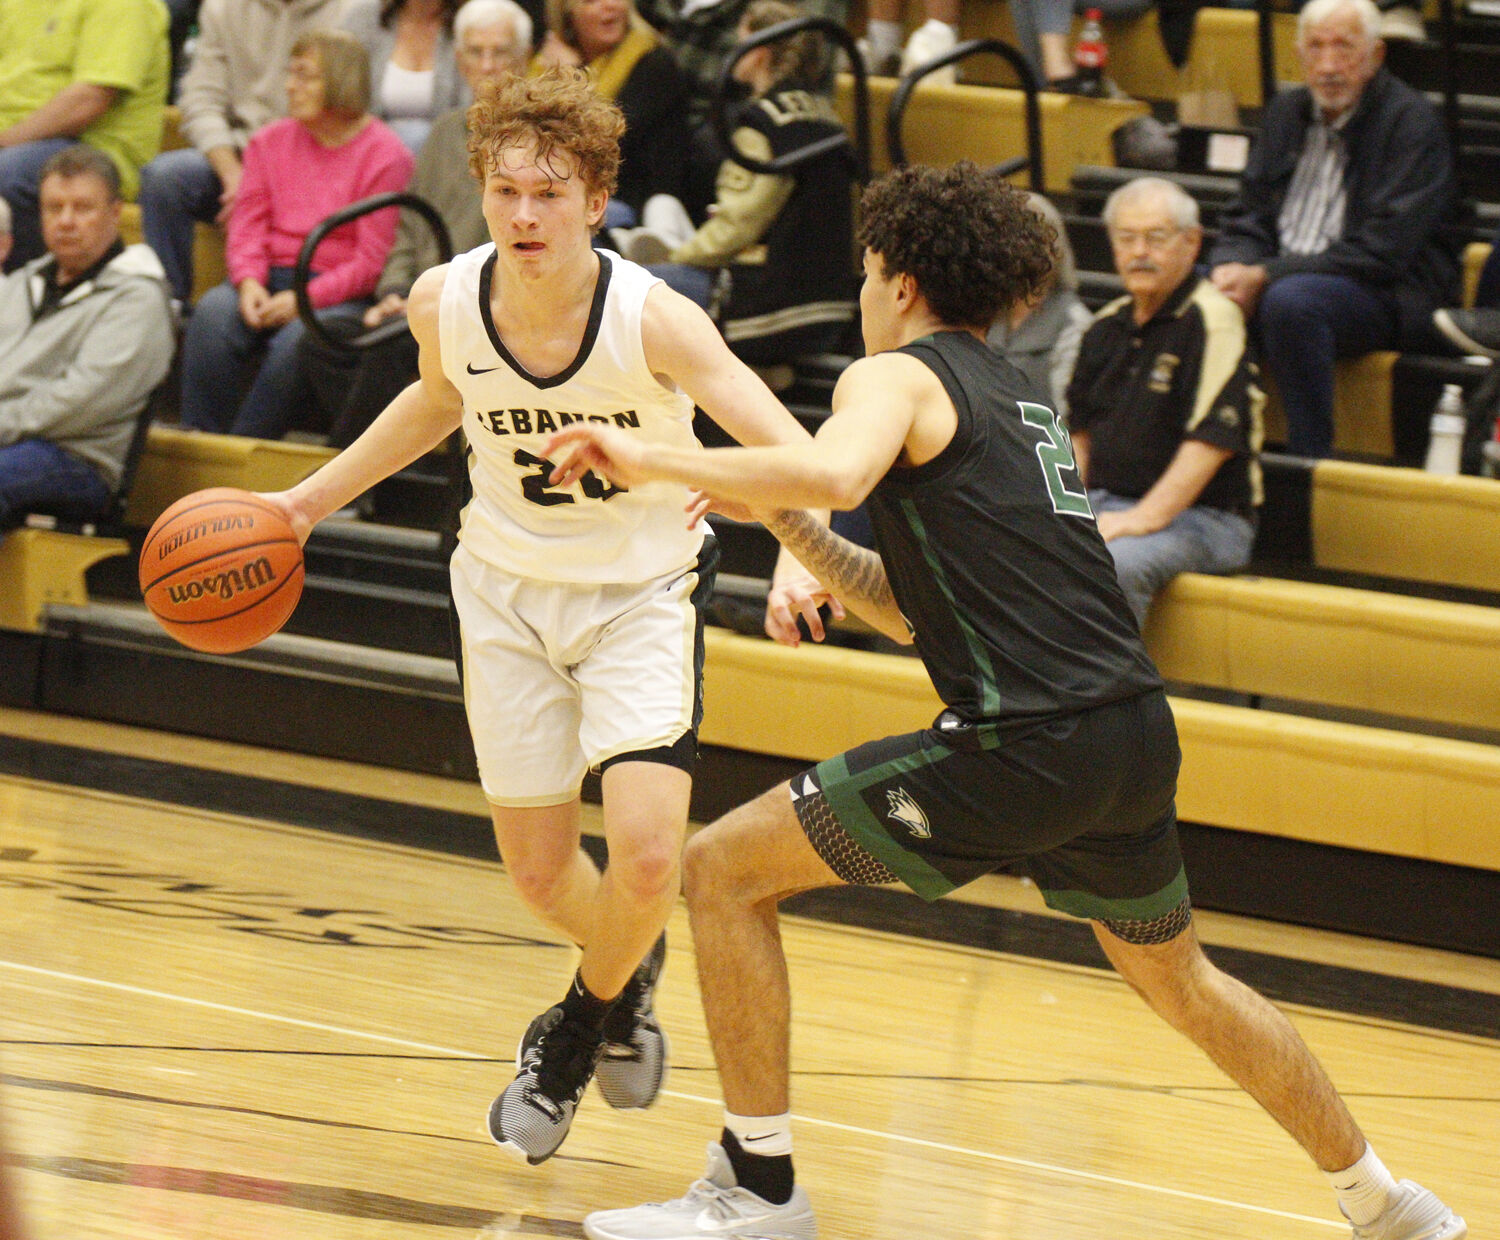 Zionsville Eagles Shine in Victory Over Lebanon Boys Basketball Team